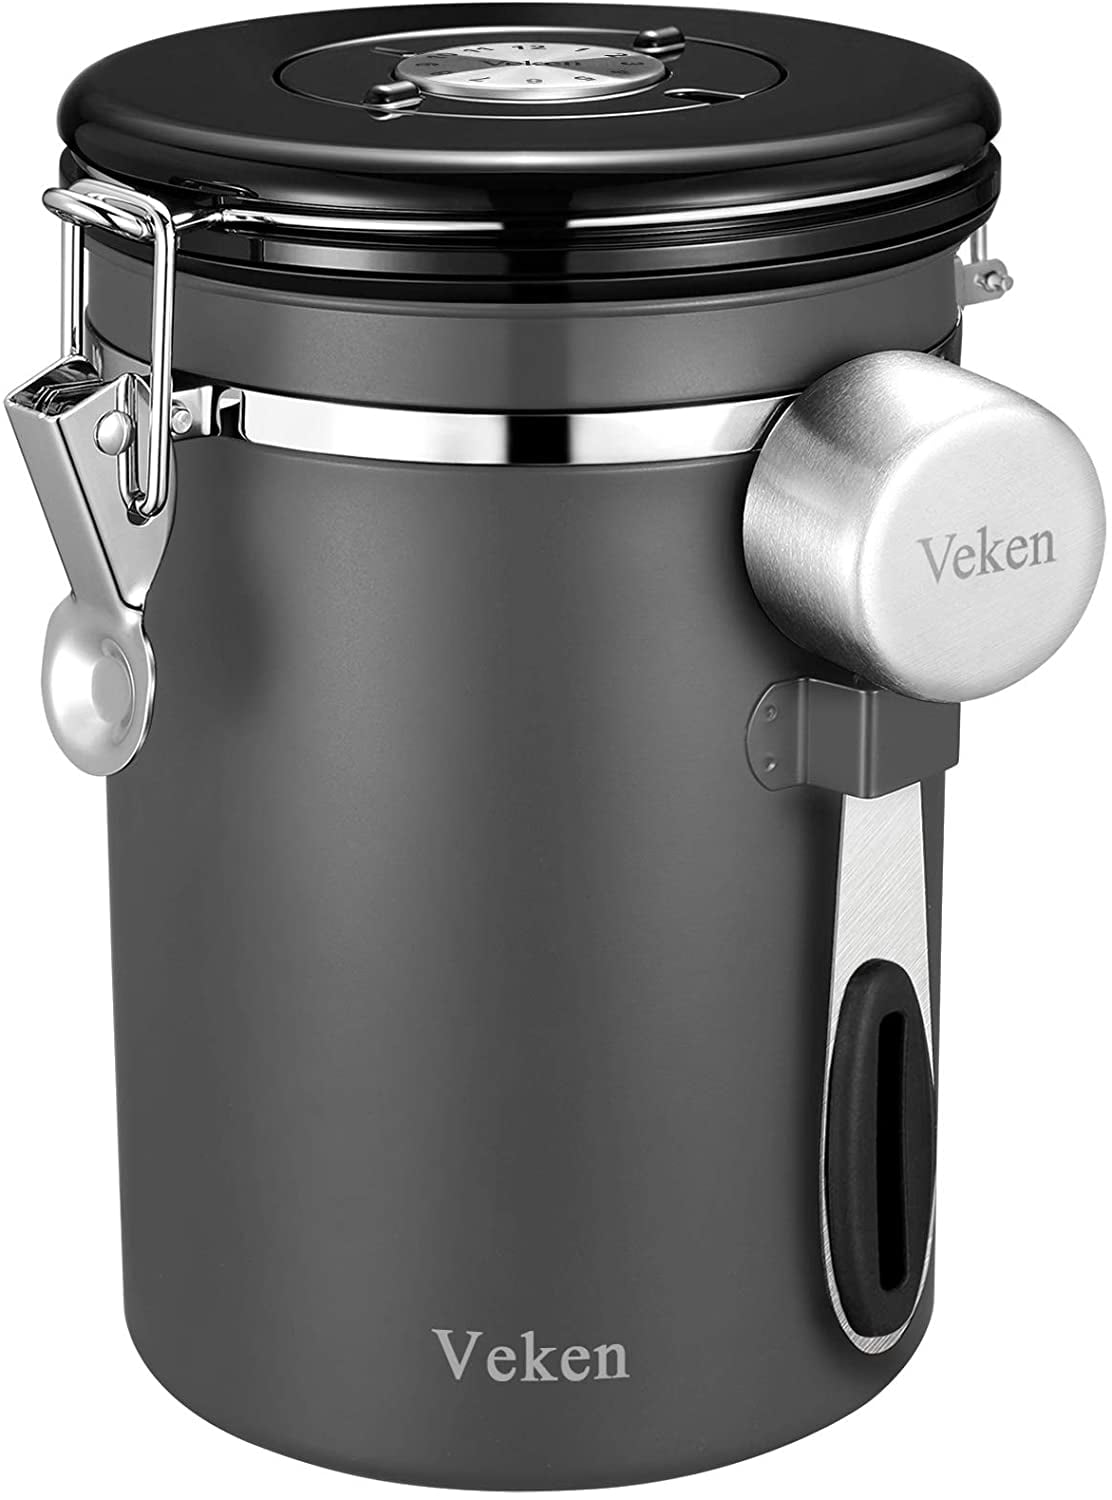  HOKEKM Airtight Coffee Canister, Stainless Steel Container for  The Kitchen, Coffee Ground Vault Jar with One Way Co2 Valve and Scoop, Tea  Coffee Sugar，Extra Coffee Spoon (Silver, 16OZ) : Home 